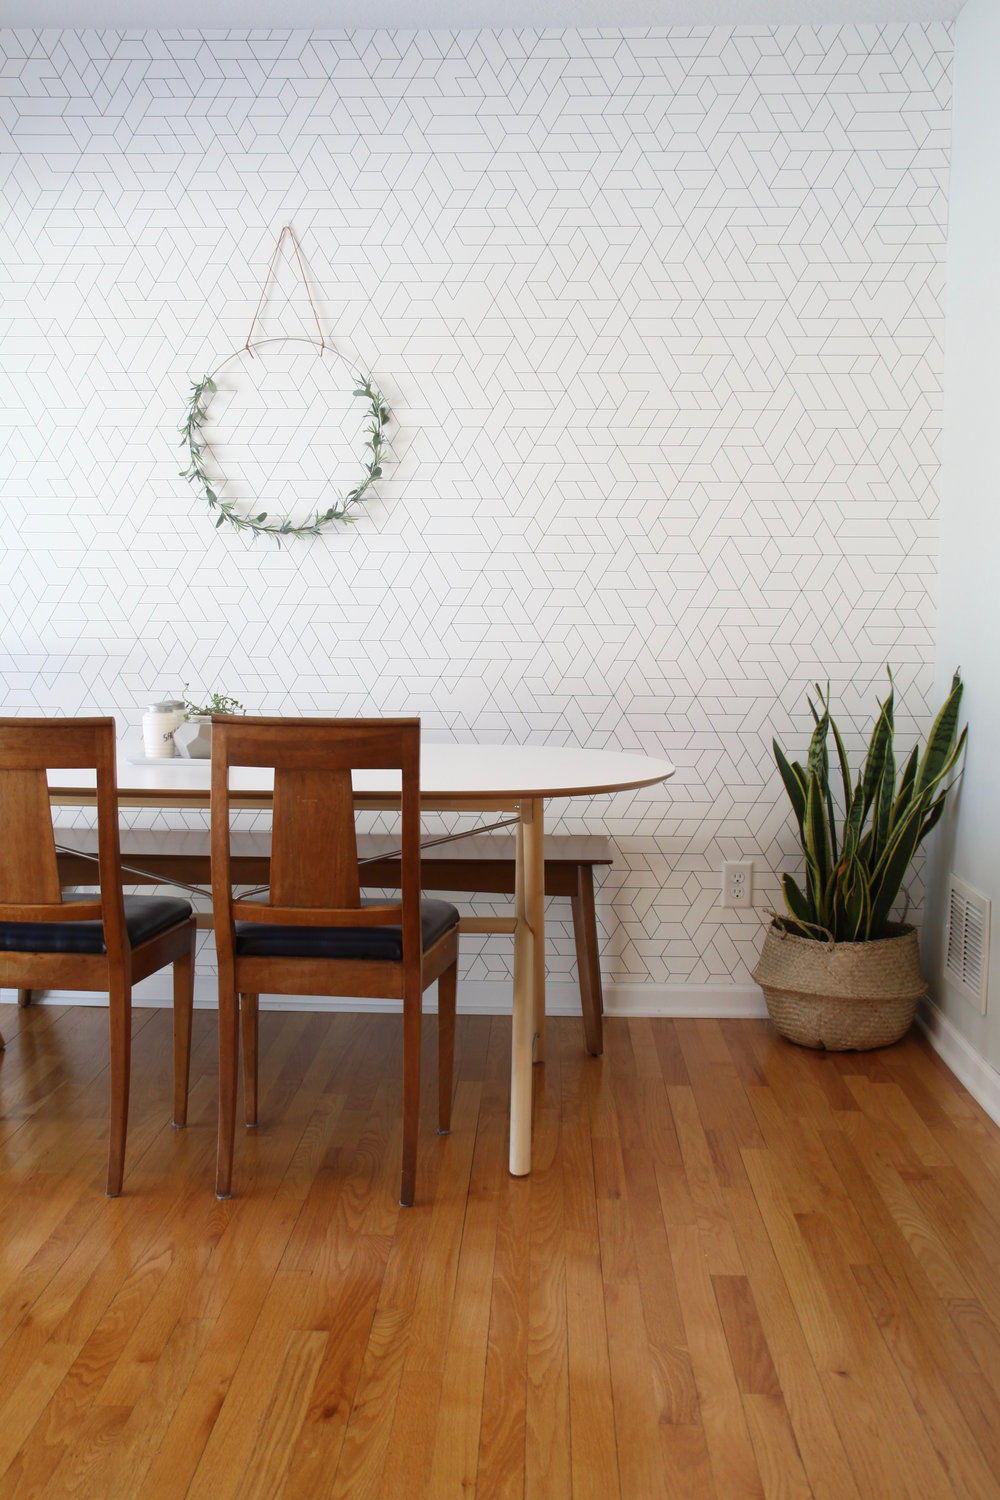 IKEA SLAHULT Dining table with graphic wallpaper and midcentury chairs